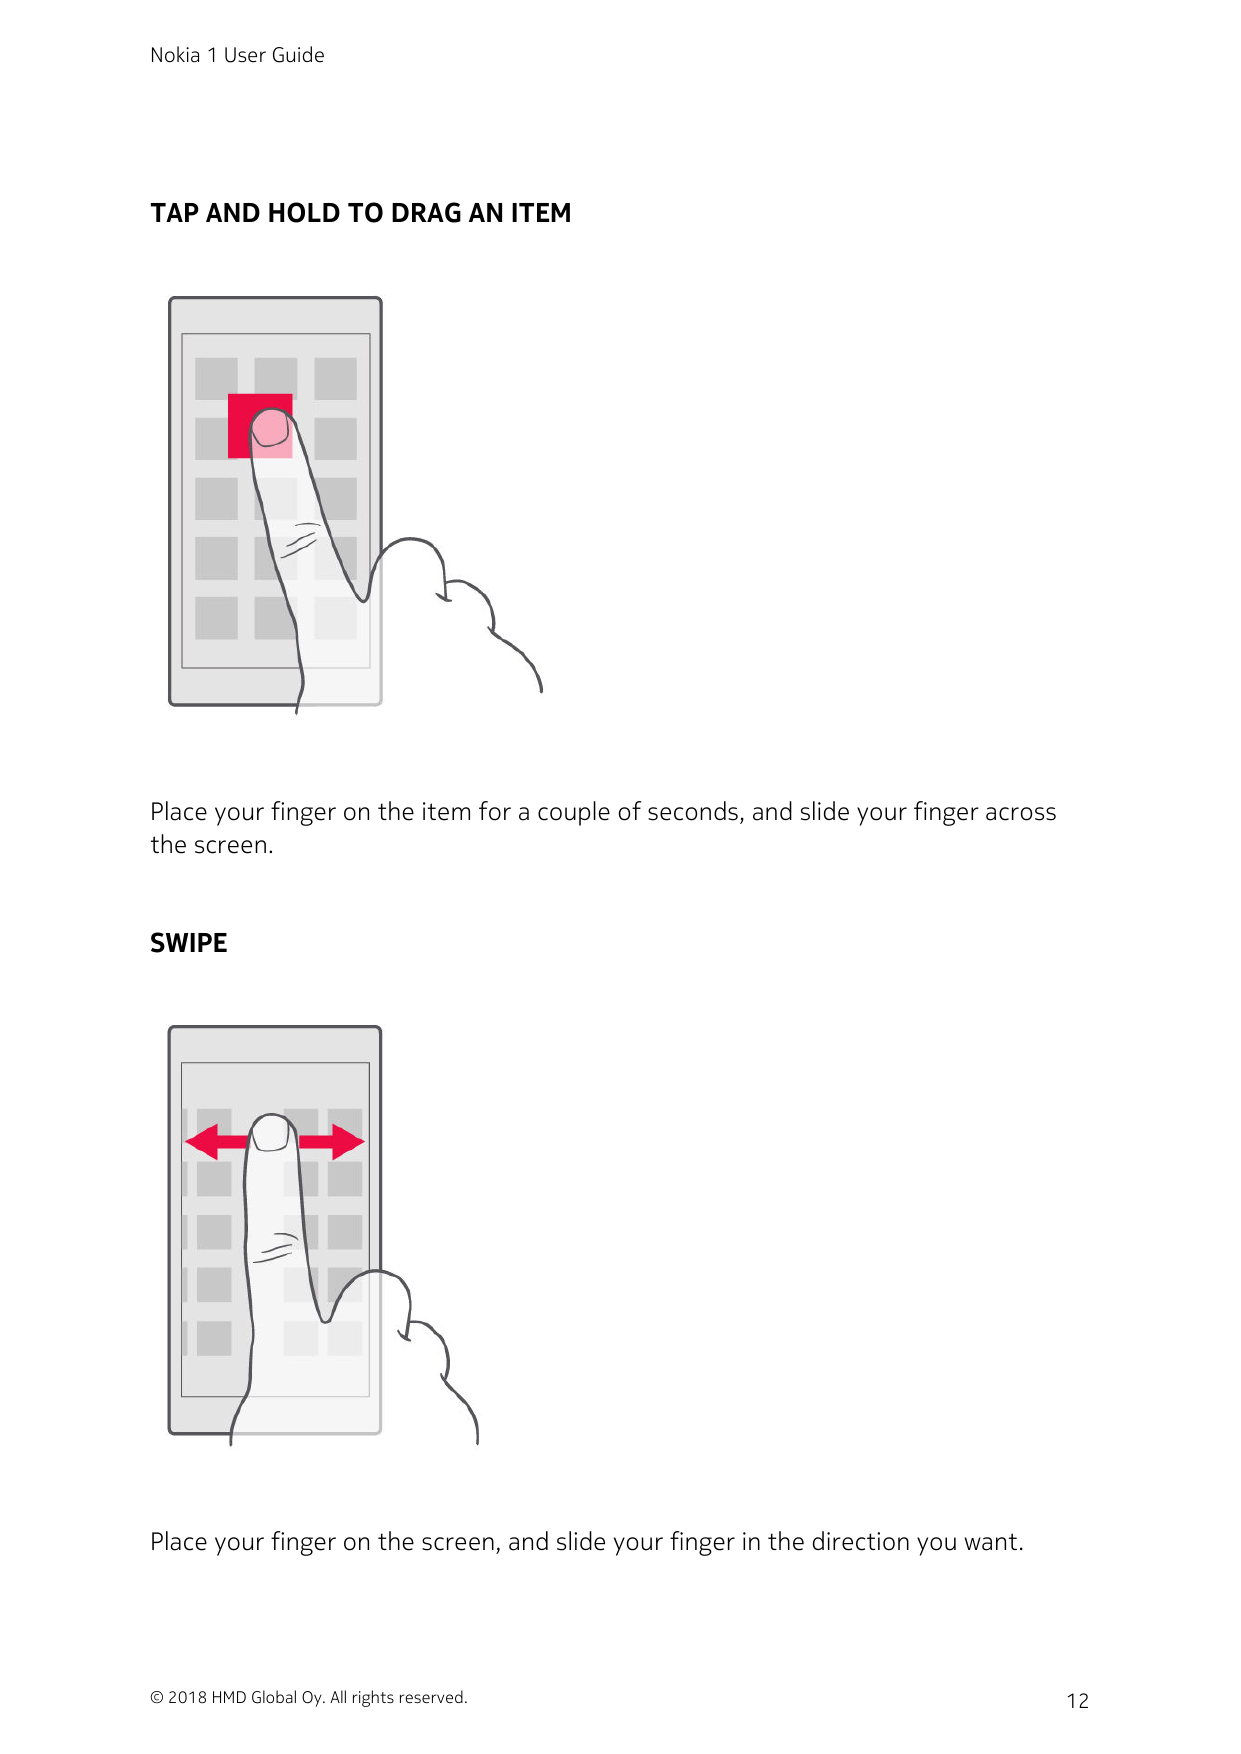 Nokia 1 User GuideTAP AND HOLD TO DRAG AN ITEMPlace your finger on the item for a couple of seconds, and slide your finger acros